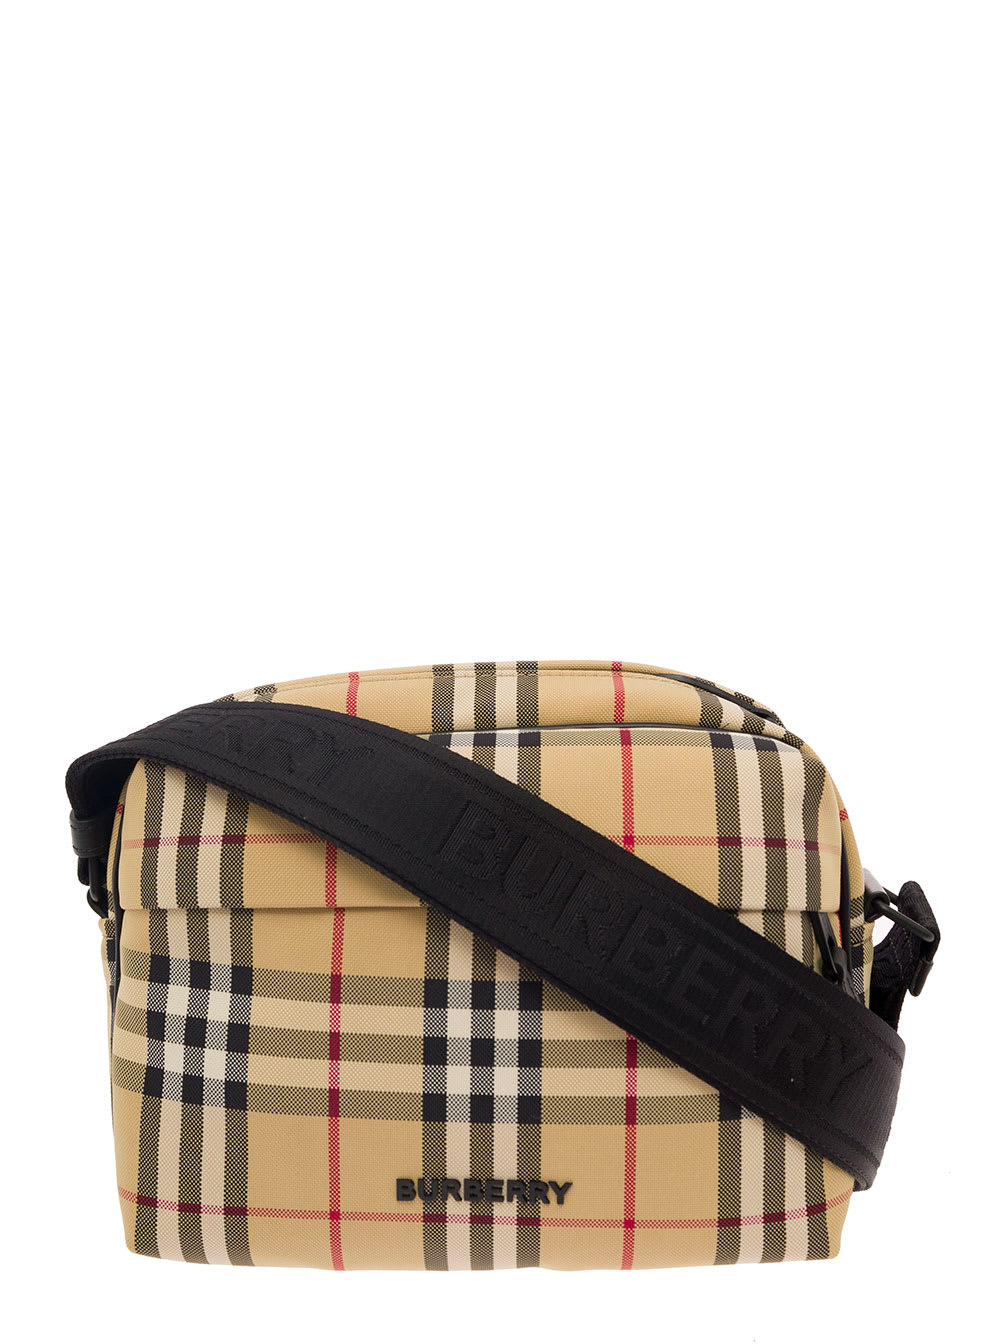 Burberry Boston Bag Price Outlet, SAVE 48% 